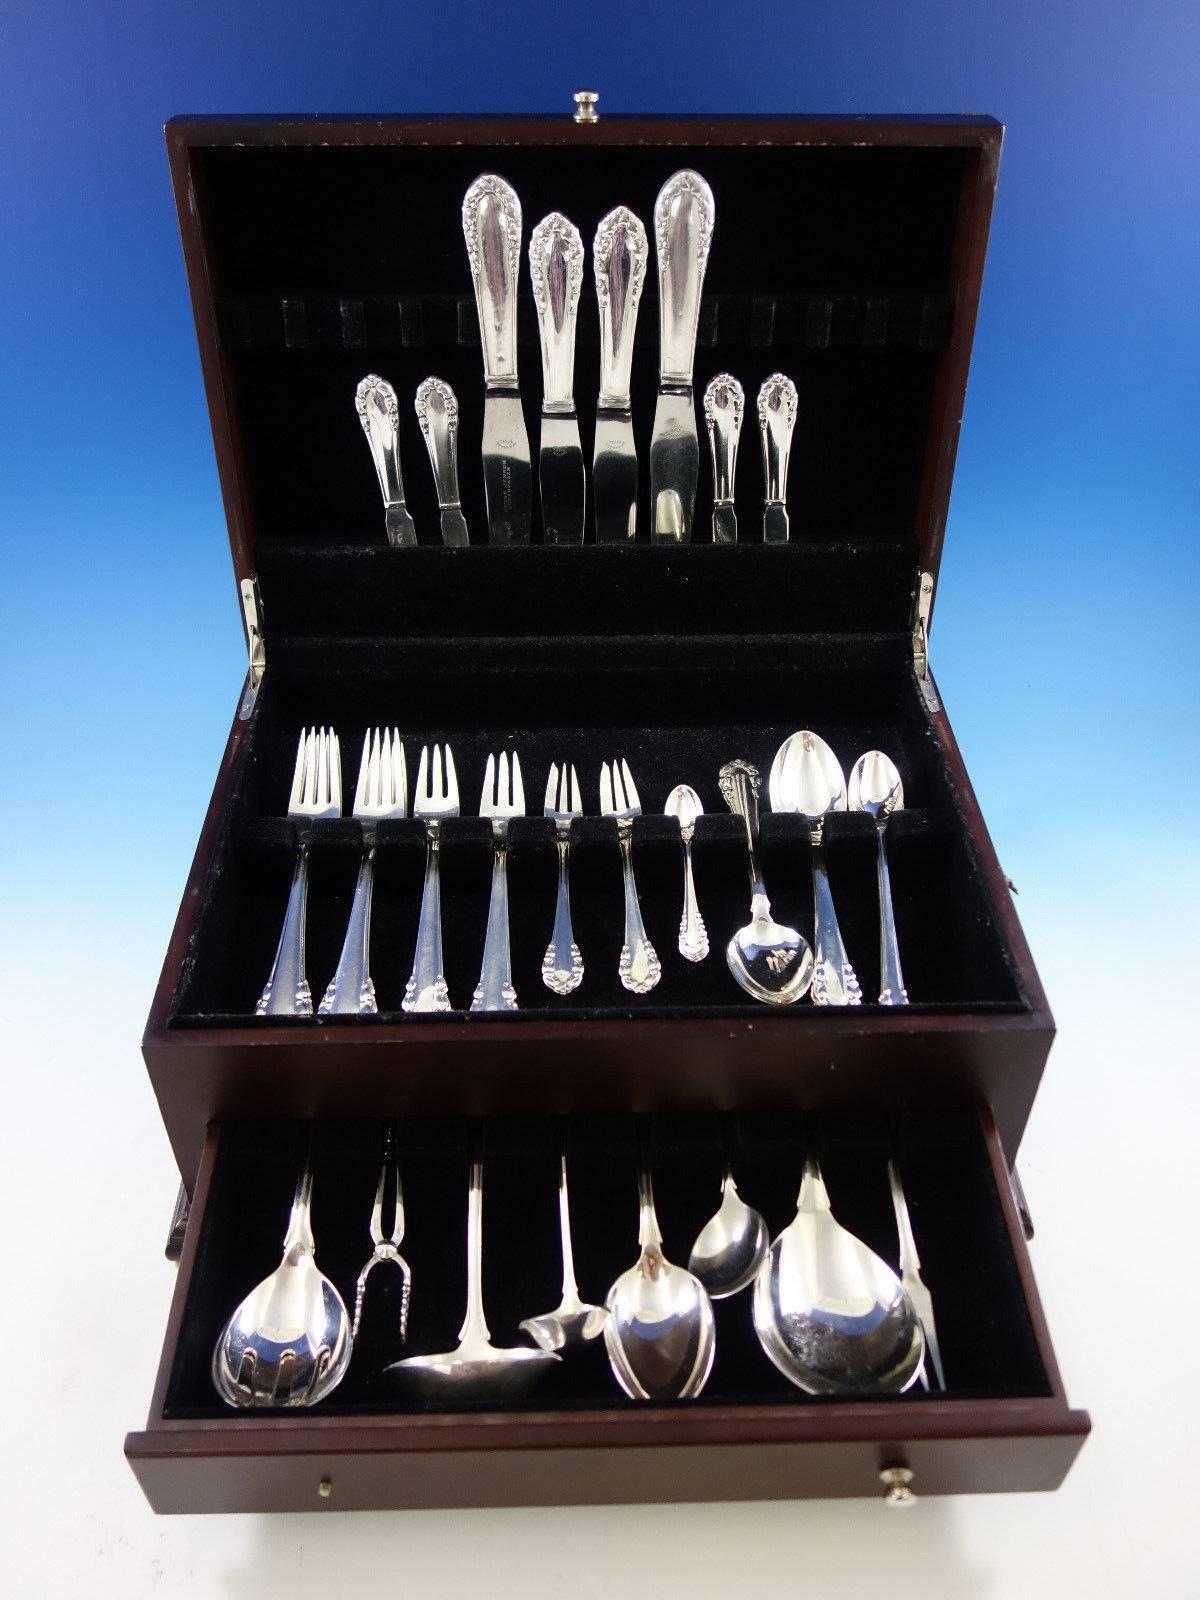 Lily of the valley by georg jensen sterling silver flatware set - 41 pieces. This set includes: 4 dinner knives, (2 sizes) 2- 9 1/8